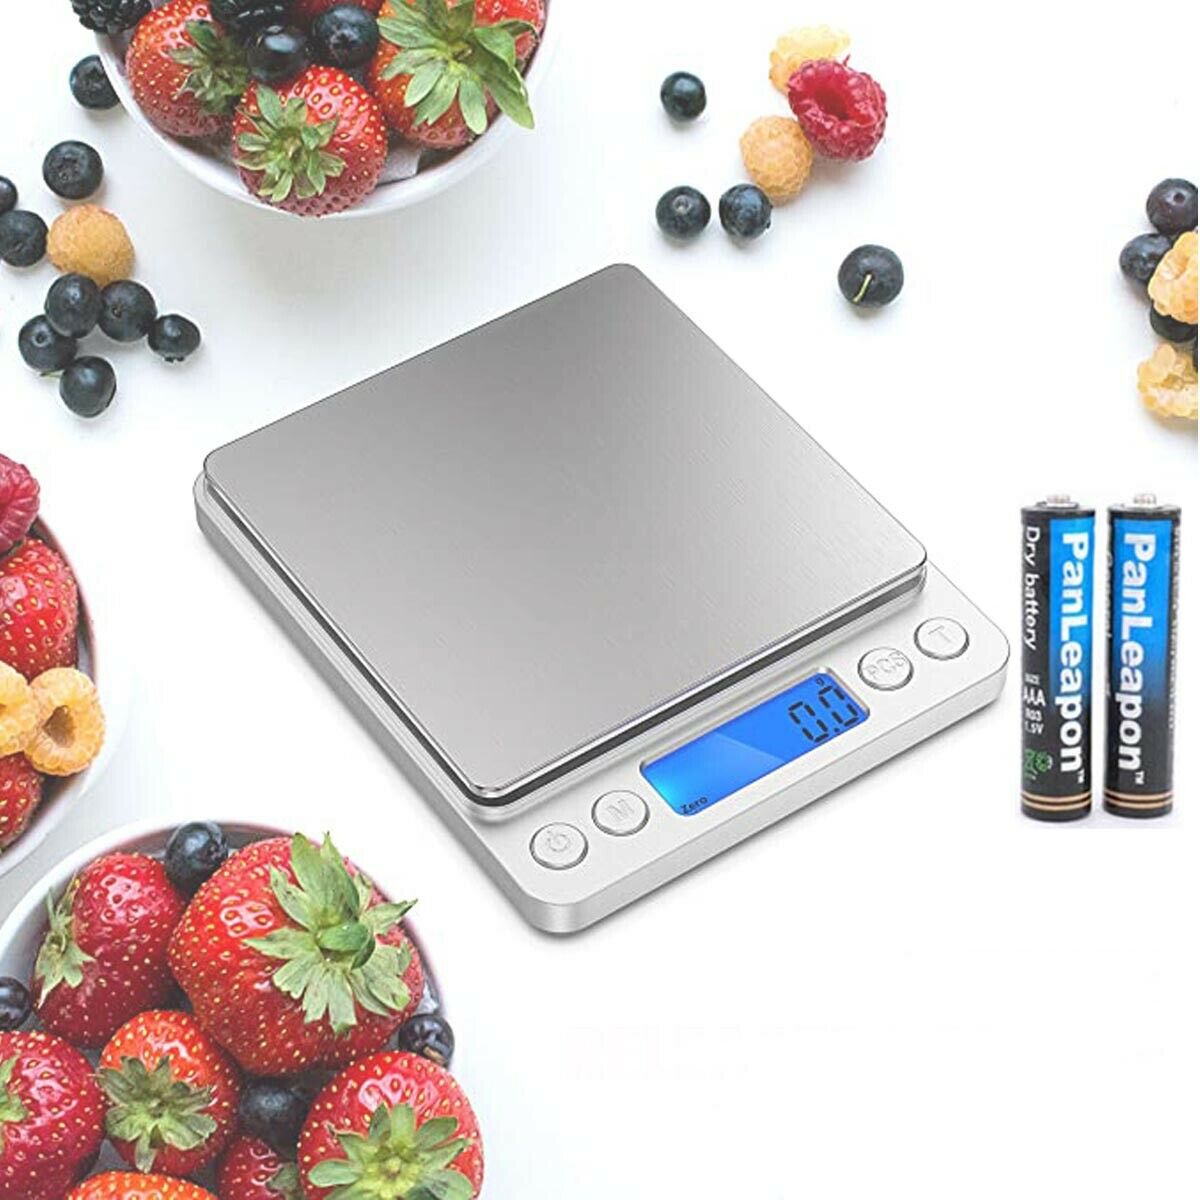 0.1g Electronic Digital Kitchen Food Cooking Weight Balance Scale Accurate